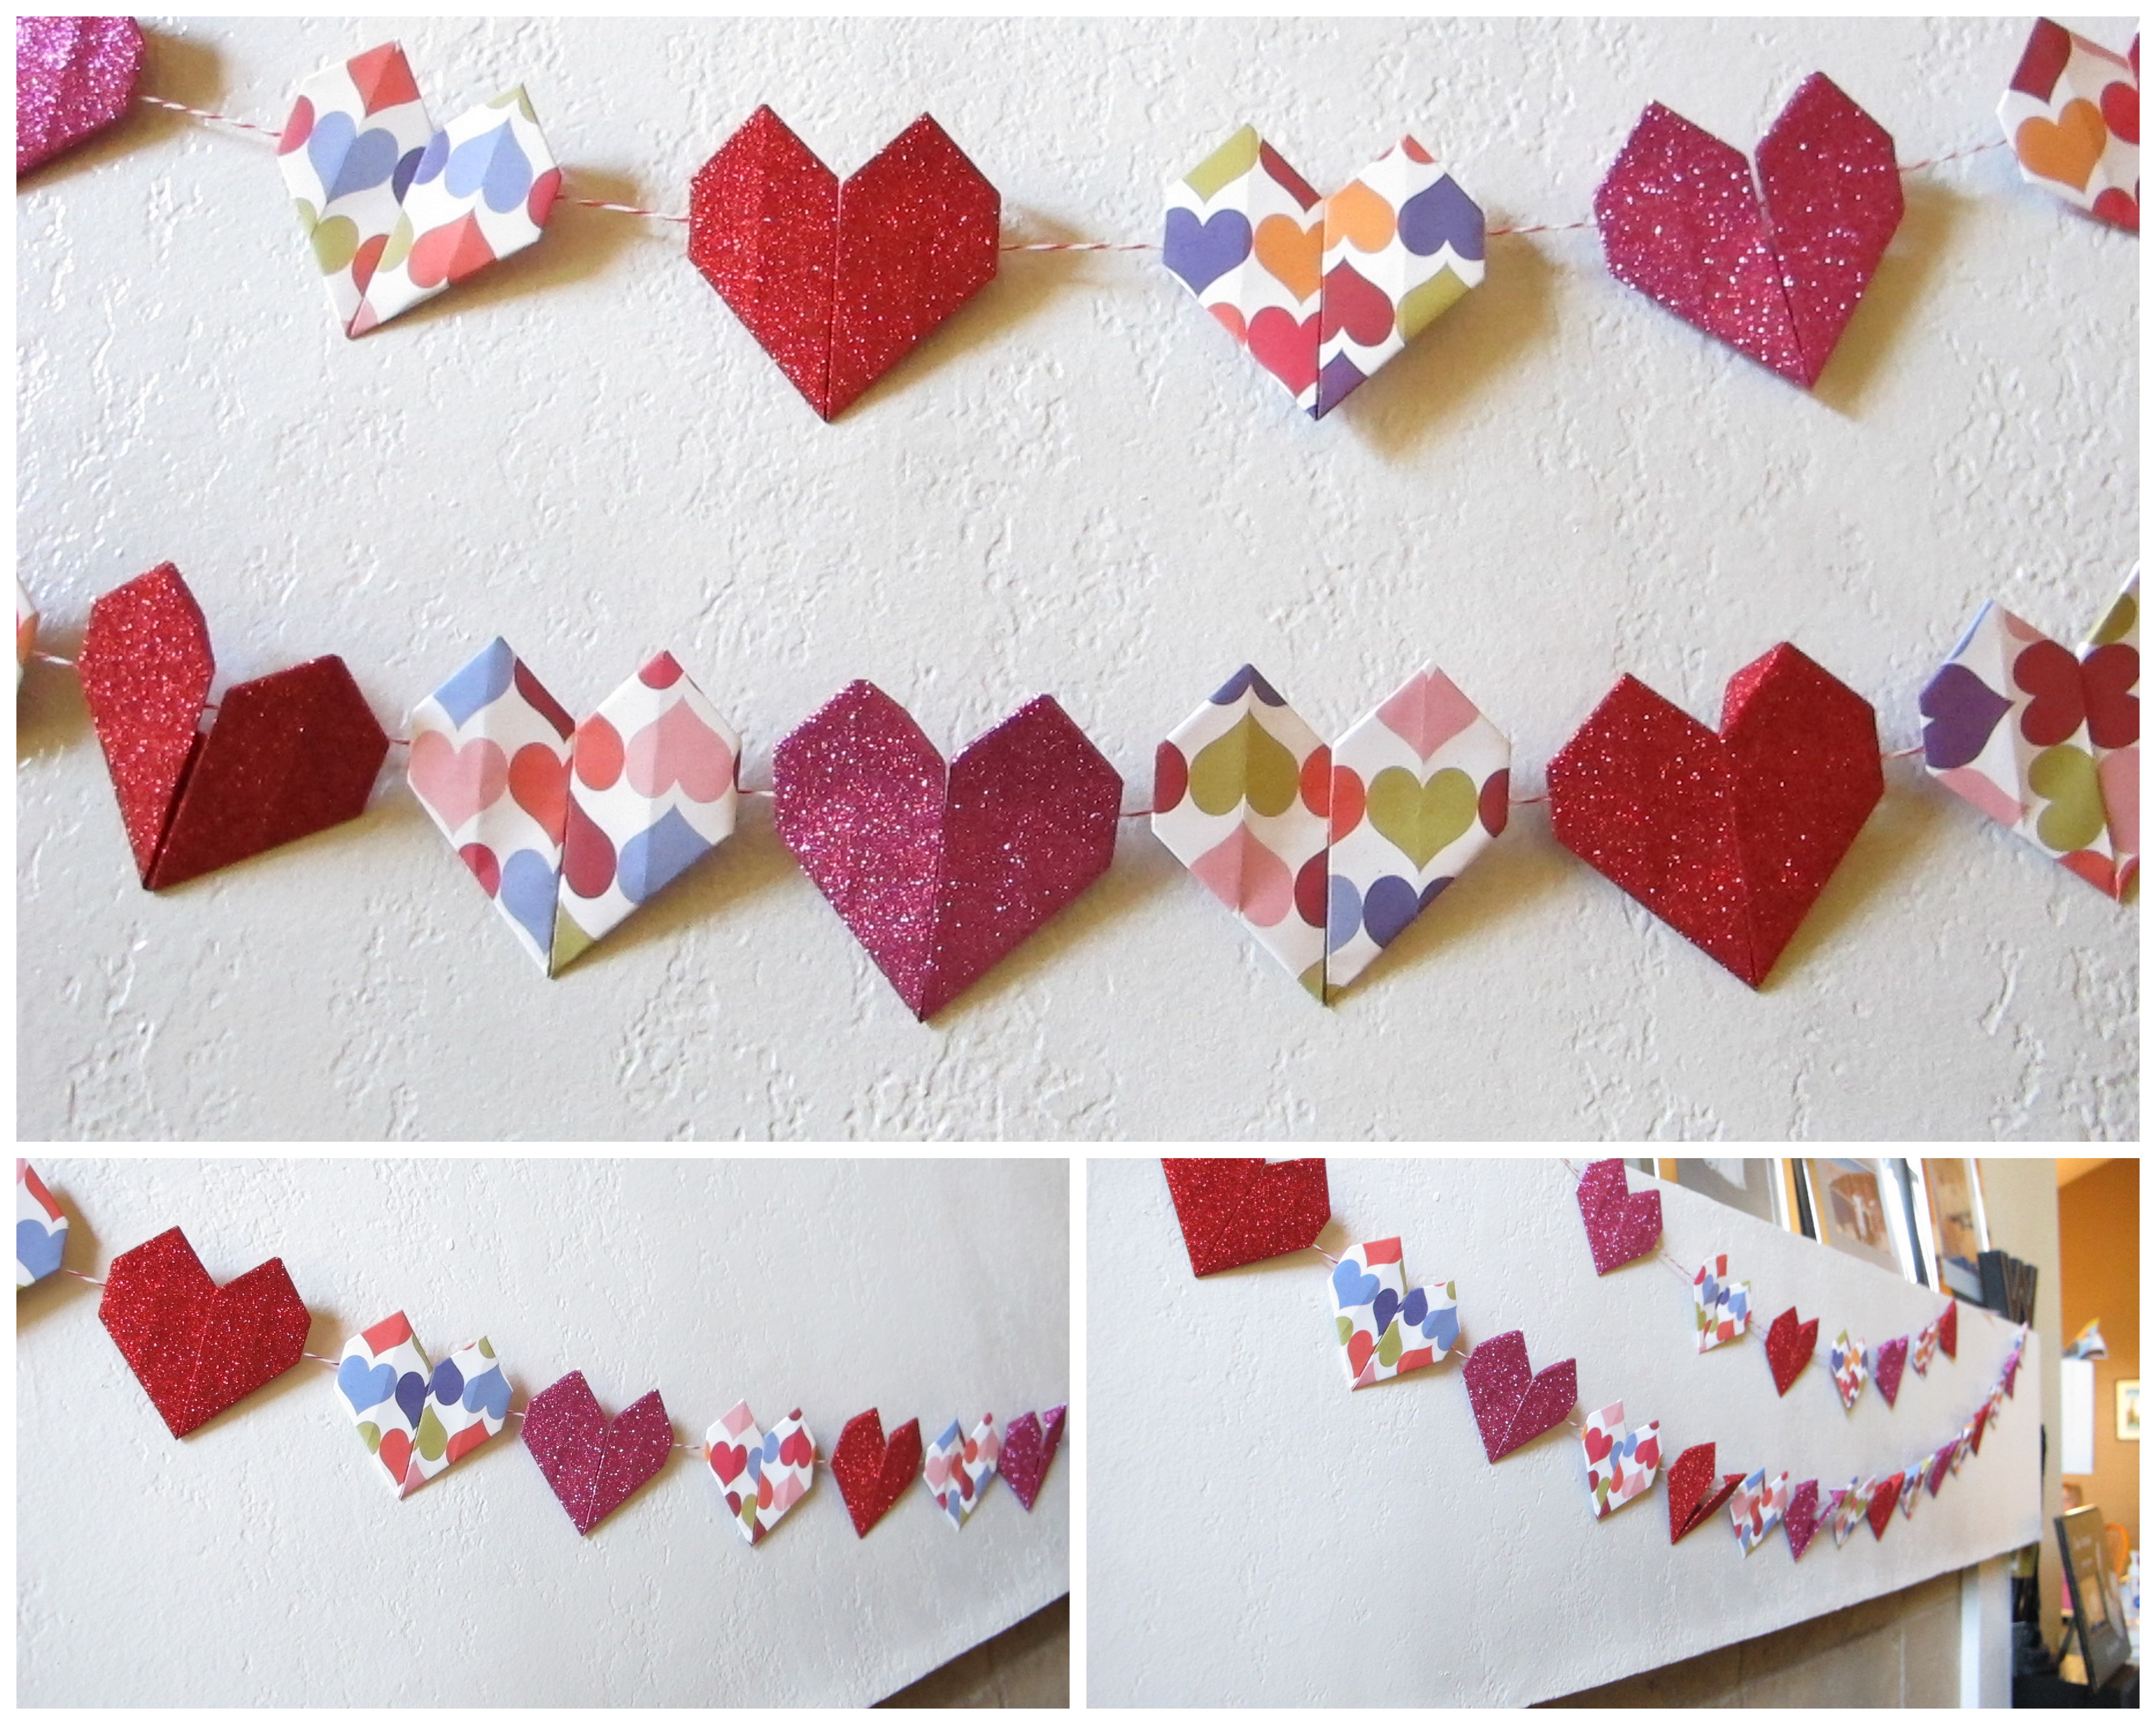 How To Make Your Own Heart Origami Garland - Savvy Sassy Moms